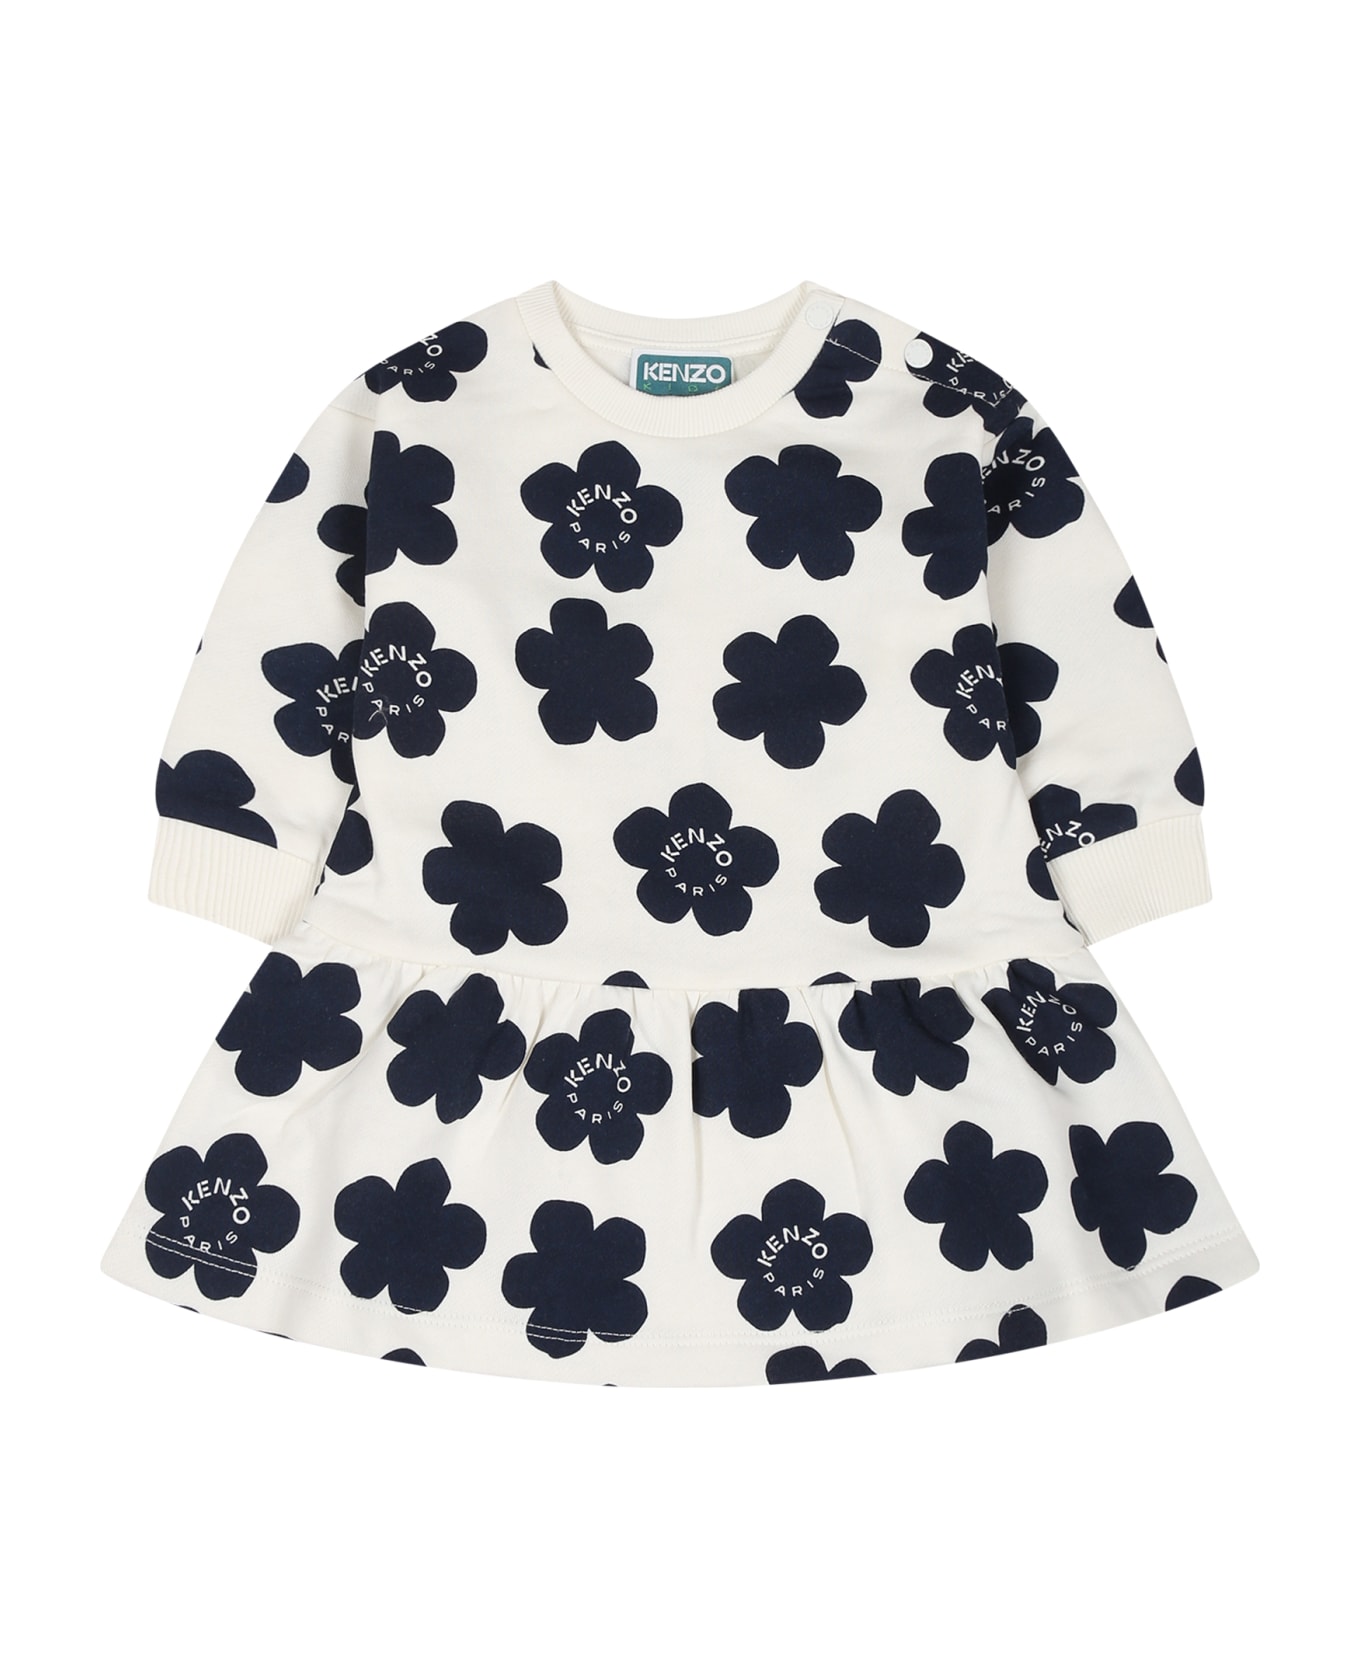 Kenzo Kids White Dress For Baby Girl With Logo And Flowers - White